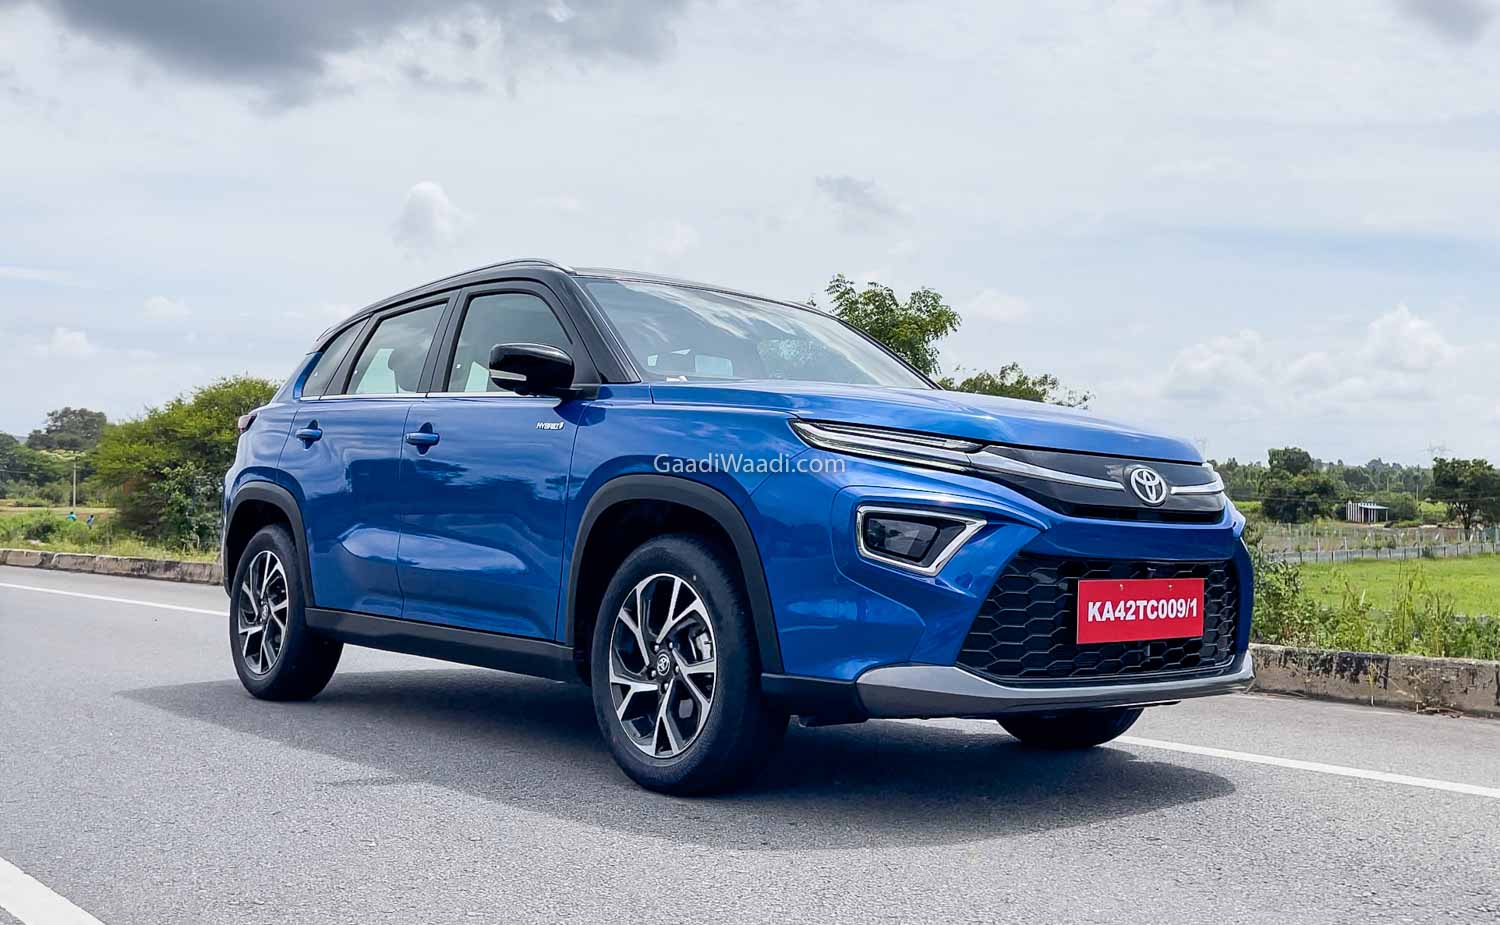 Toyota Hyryder Dual Tone Variants' Prices Out, Starts At Rs. 17.69